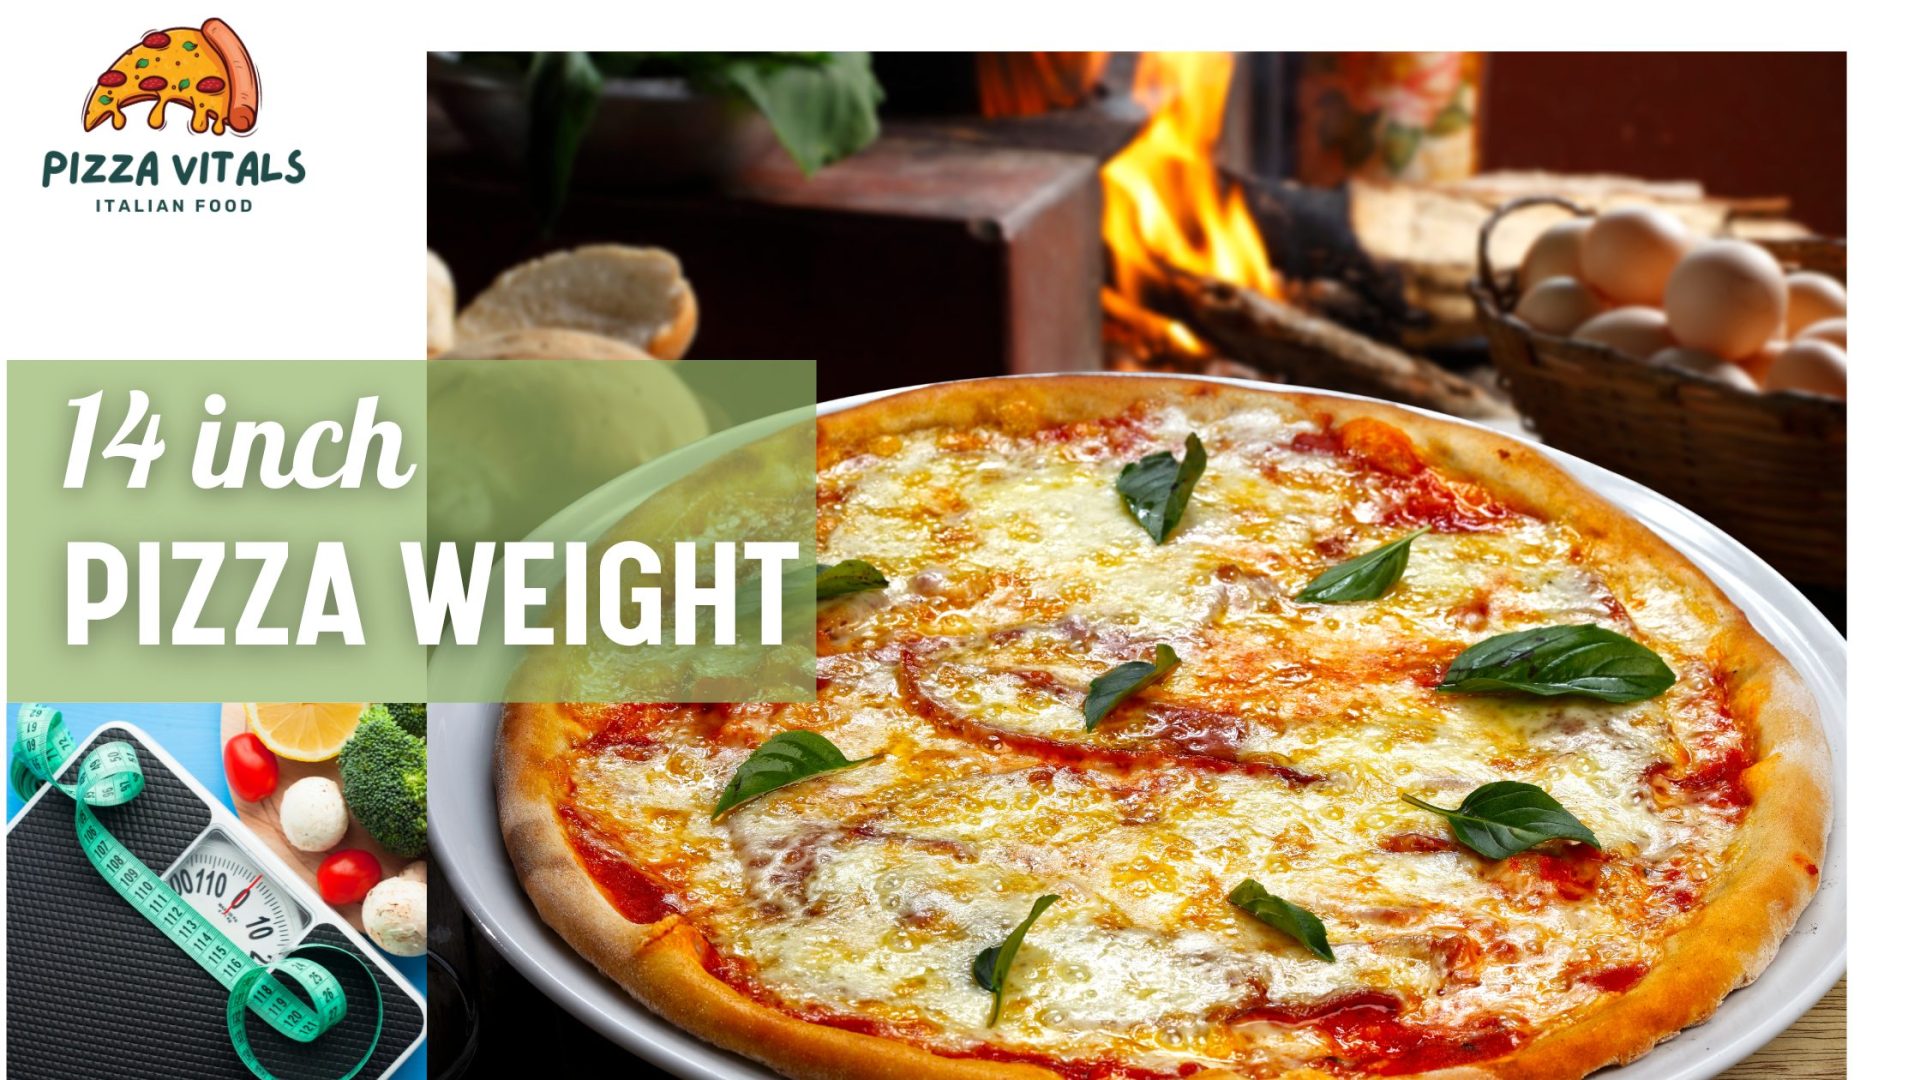 What Should Be The Ideal 14 Inch Pizza Weight?